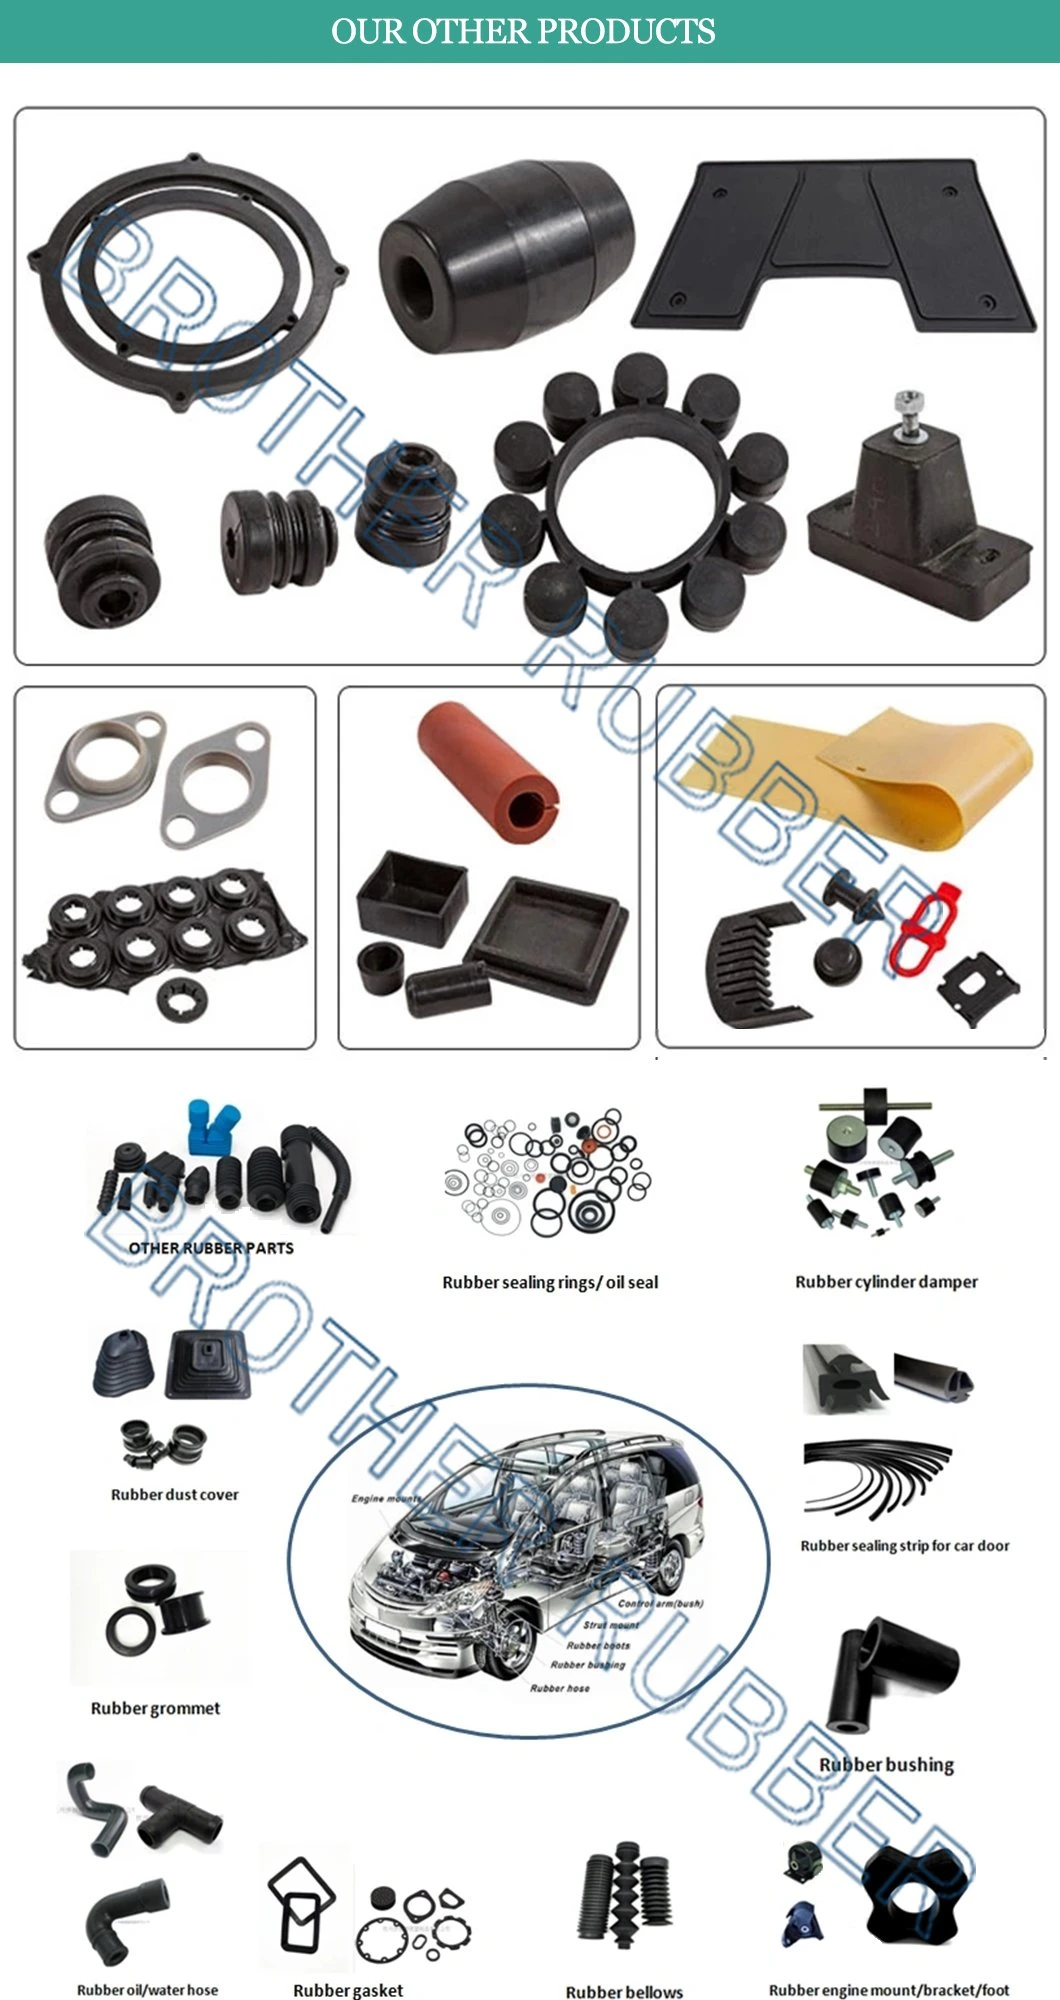 OEM Molded Auto Rubber Parts for Classic Cars